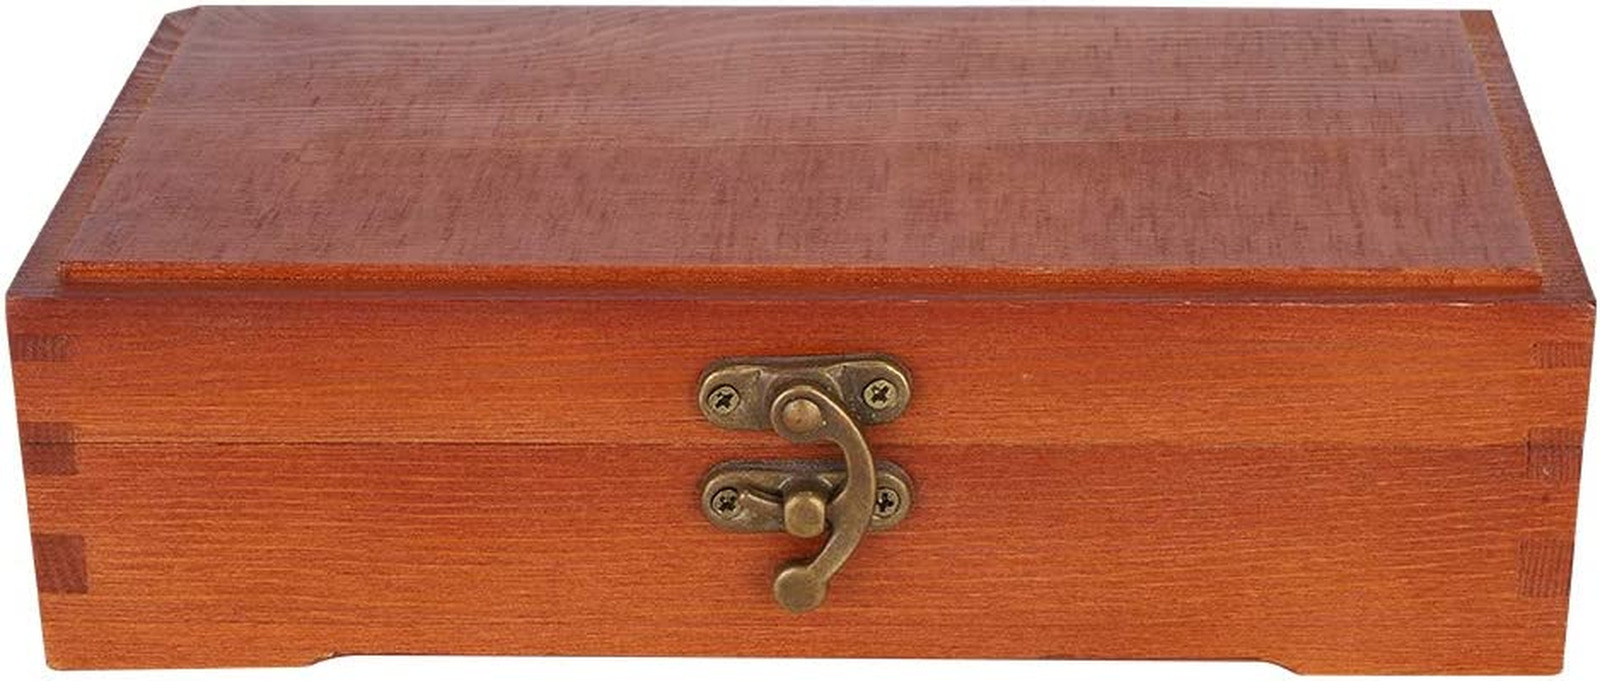 Art Supply Wooden Storage Box, Small Vintage Storage Box with Hinged Lid and Loc